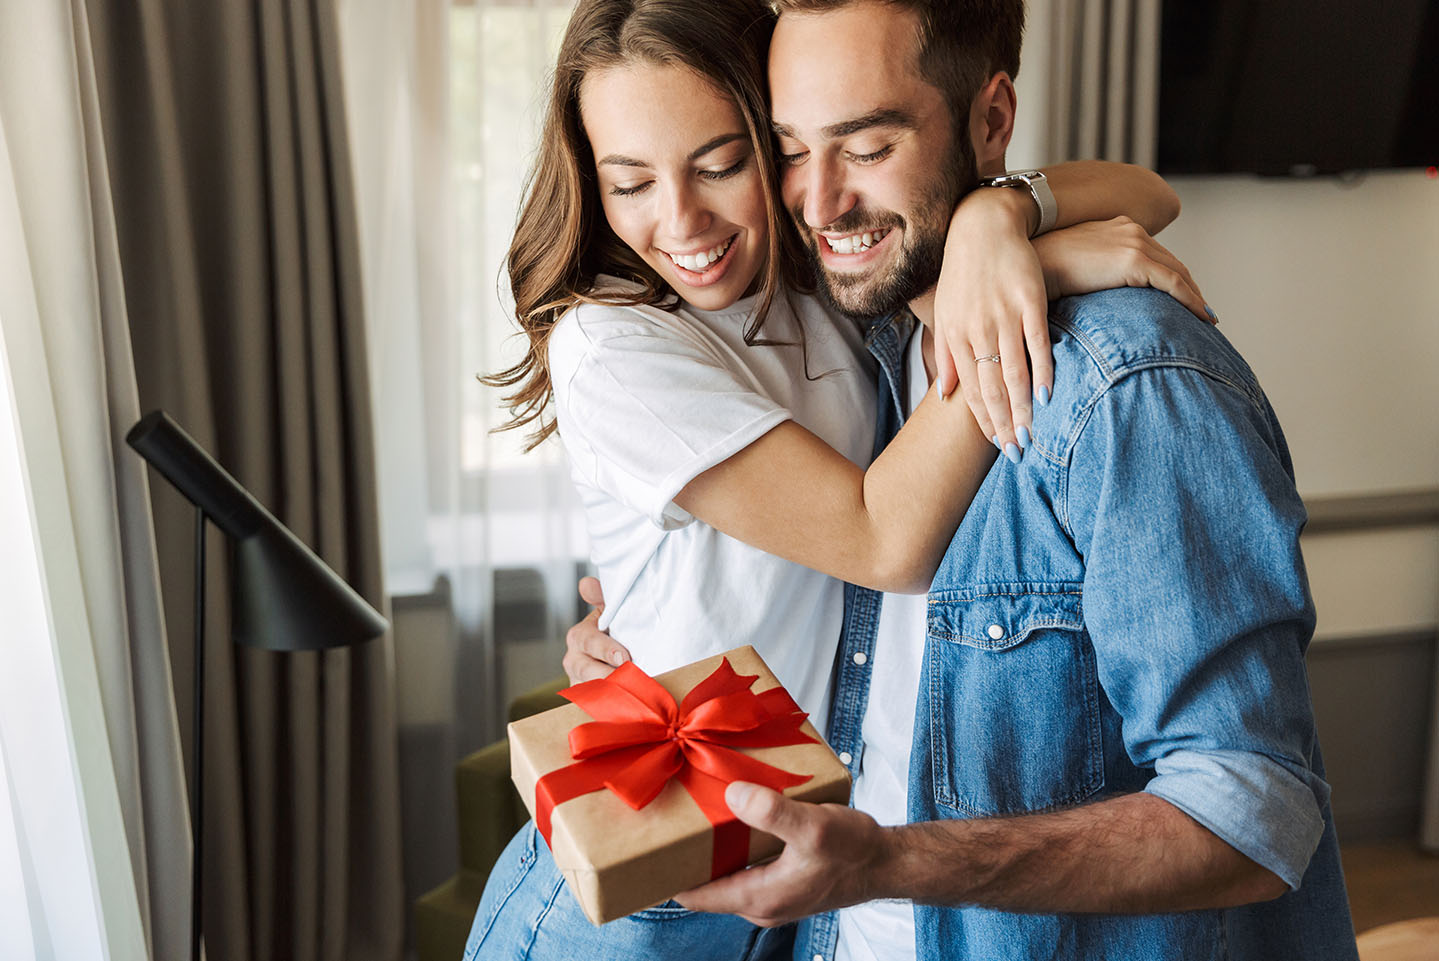 Image showing a happy couple with a gift